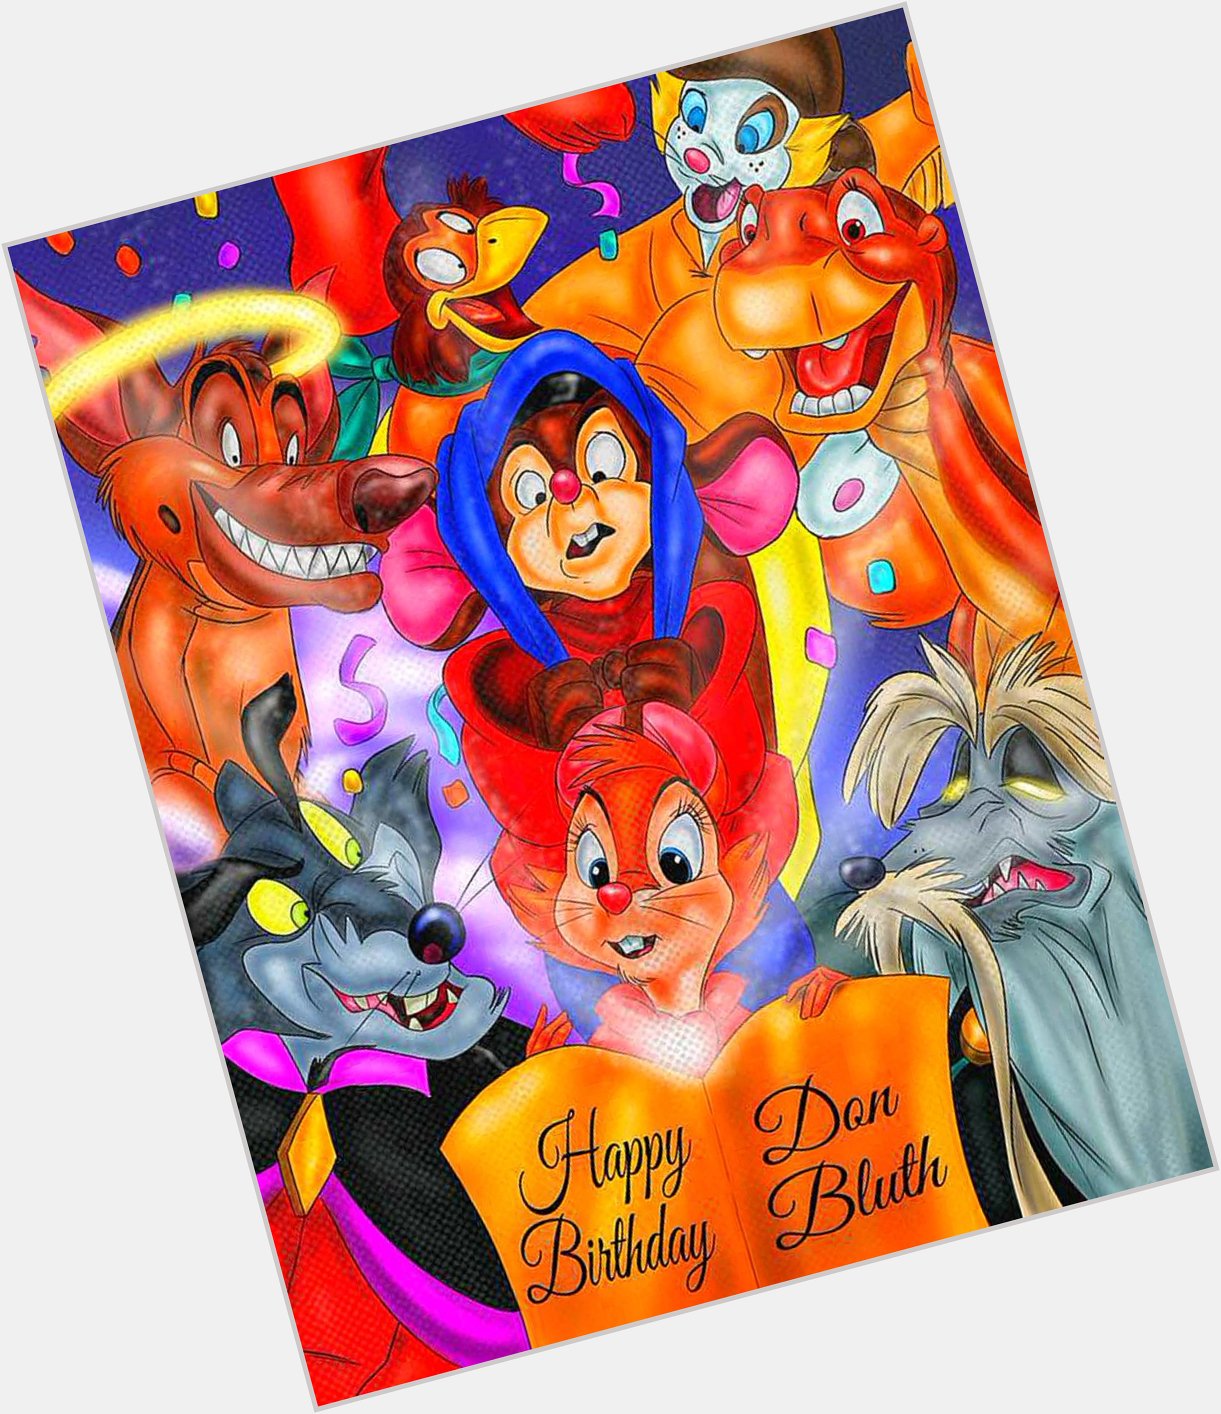 Just wanna wish a very happy 82nd birthday to Don Bluth! 